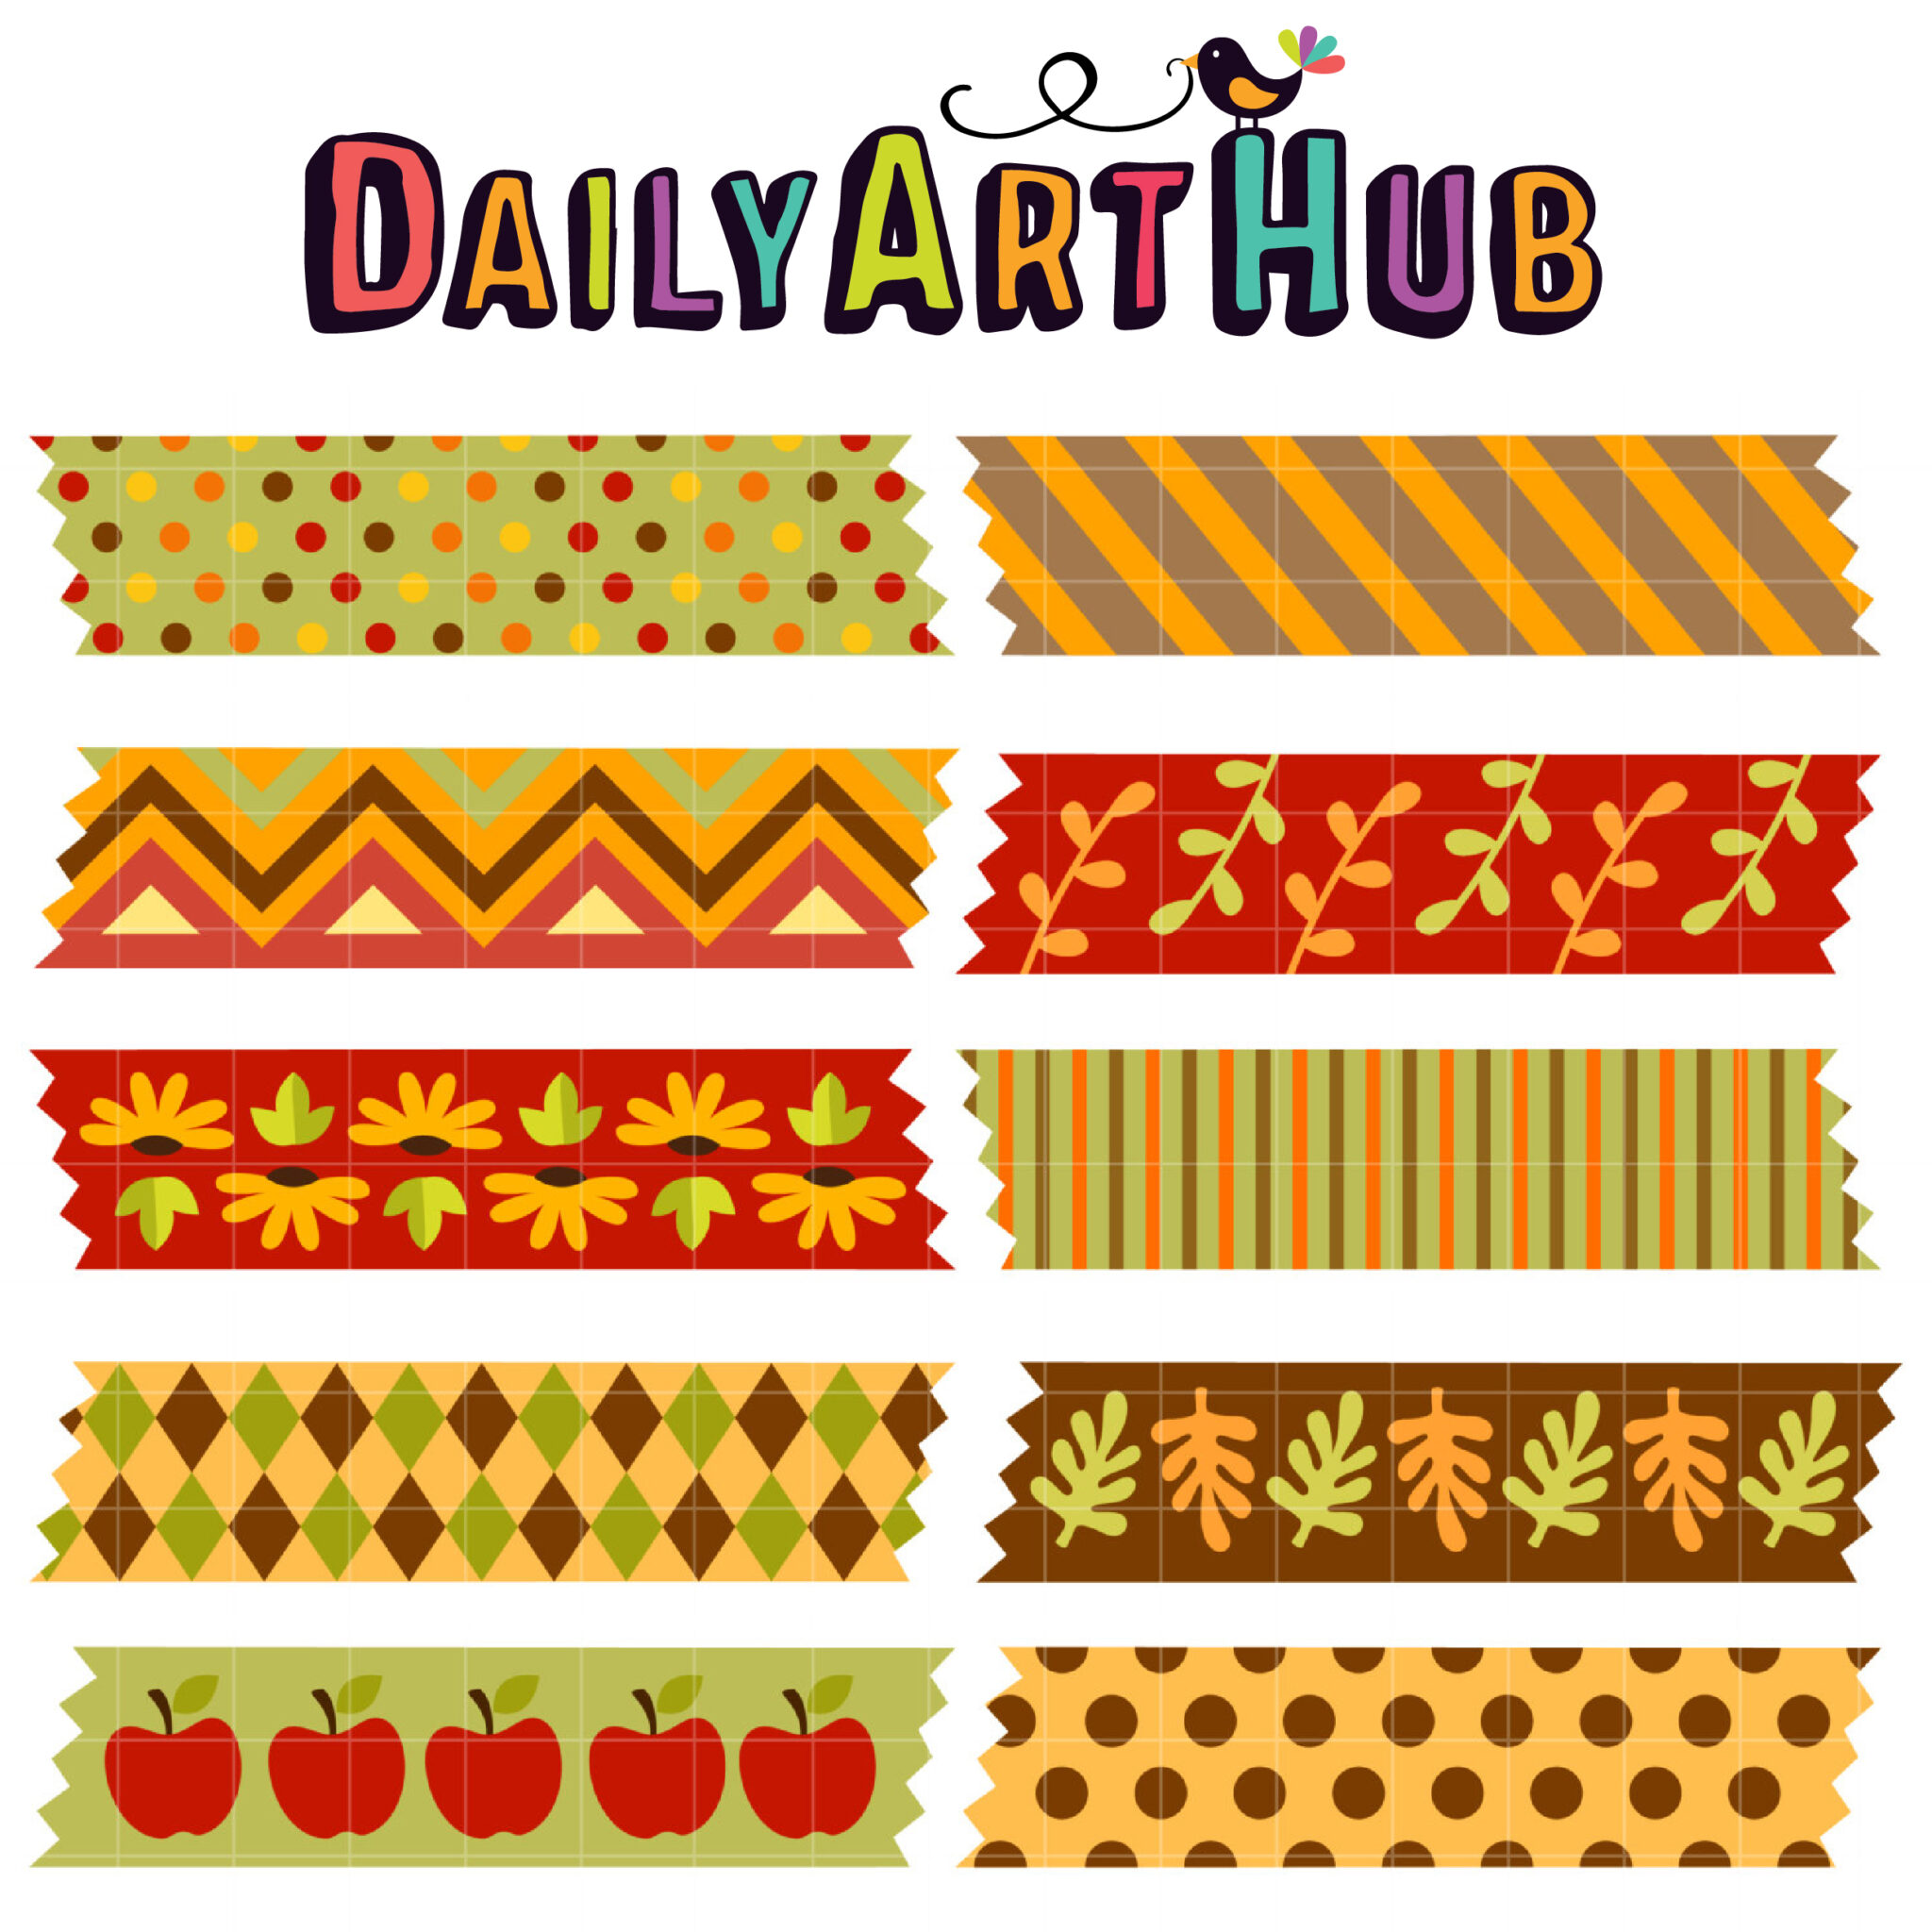 Washi Tape SVG cut file for electronic cutting machines washi tape cut file  for scrapbooking